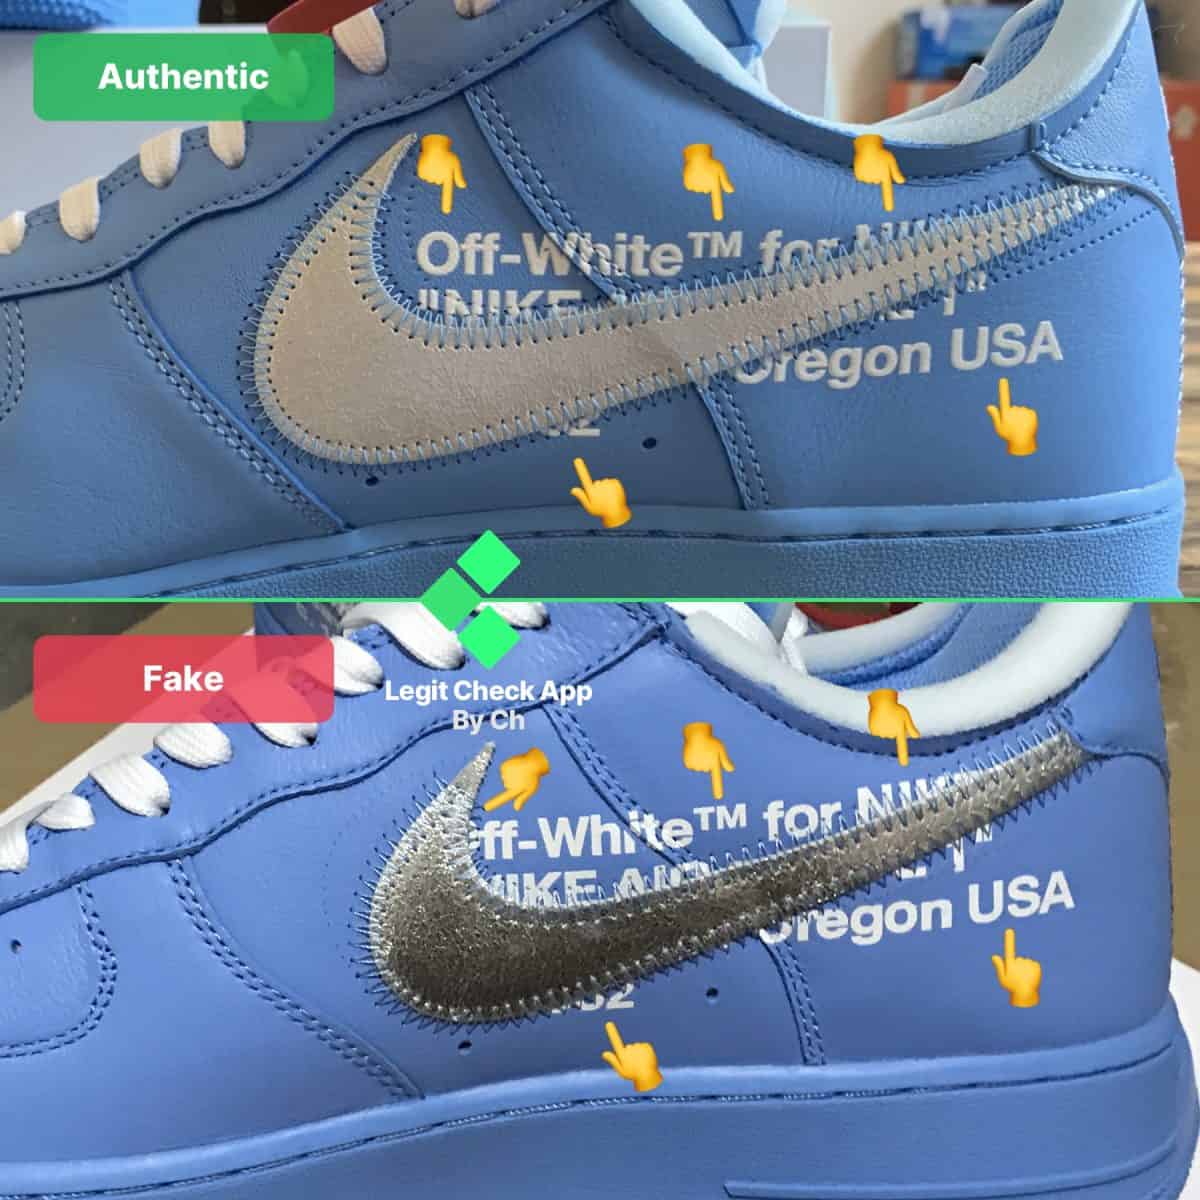 how to authenticate off-white air force 1 mca